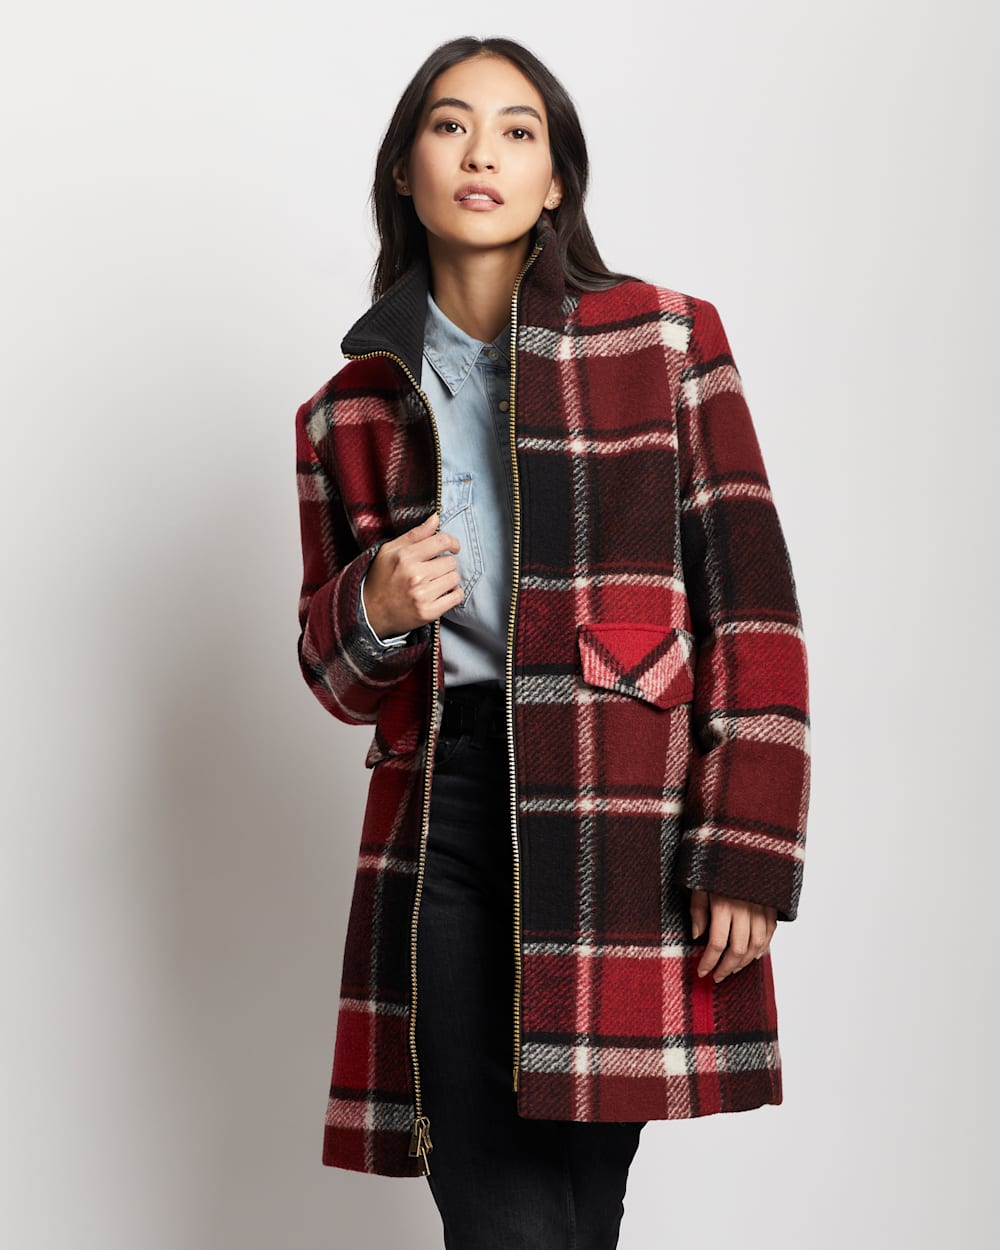 ALTERNATE VIEW OF WOMEN'S CAMDEN TOPPER COAT IN RED/BLACK EXPLODED PLAID image number 2